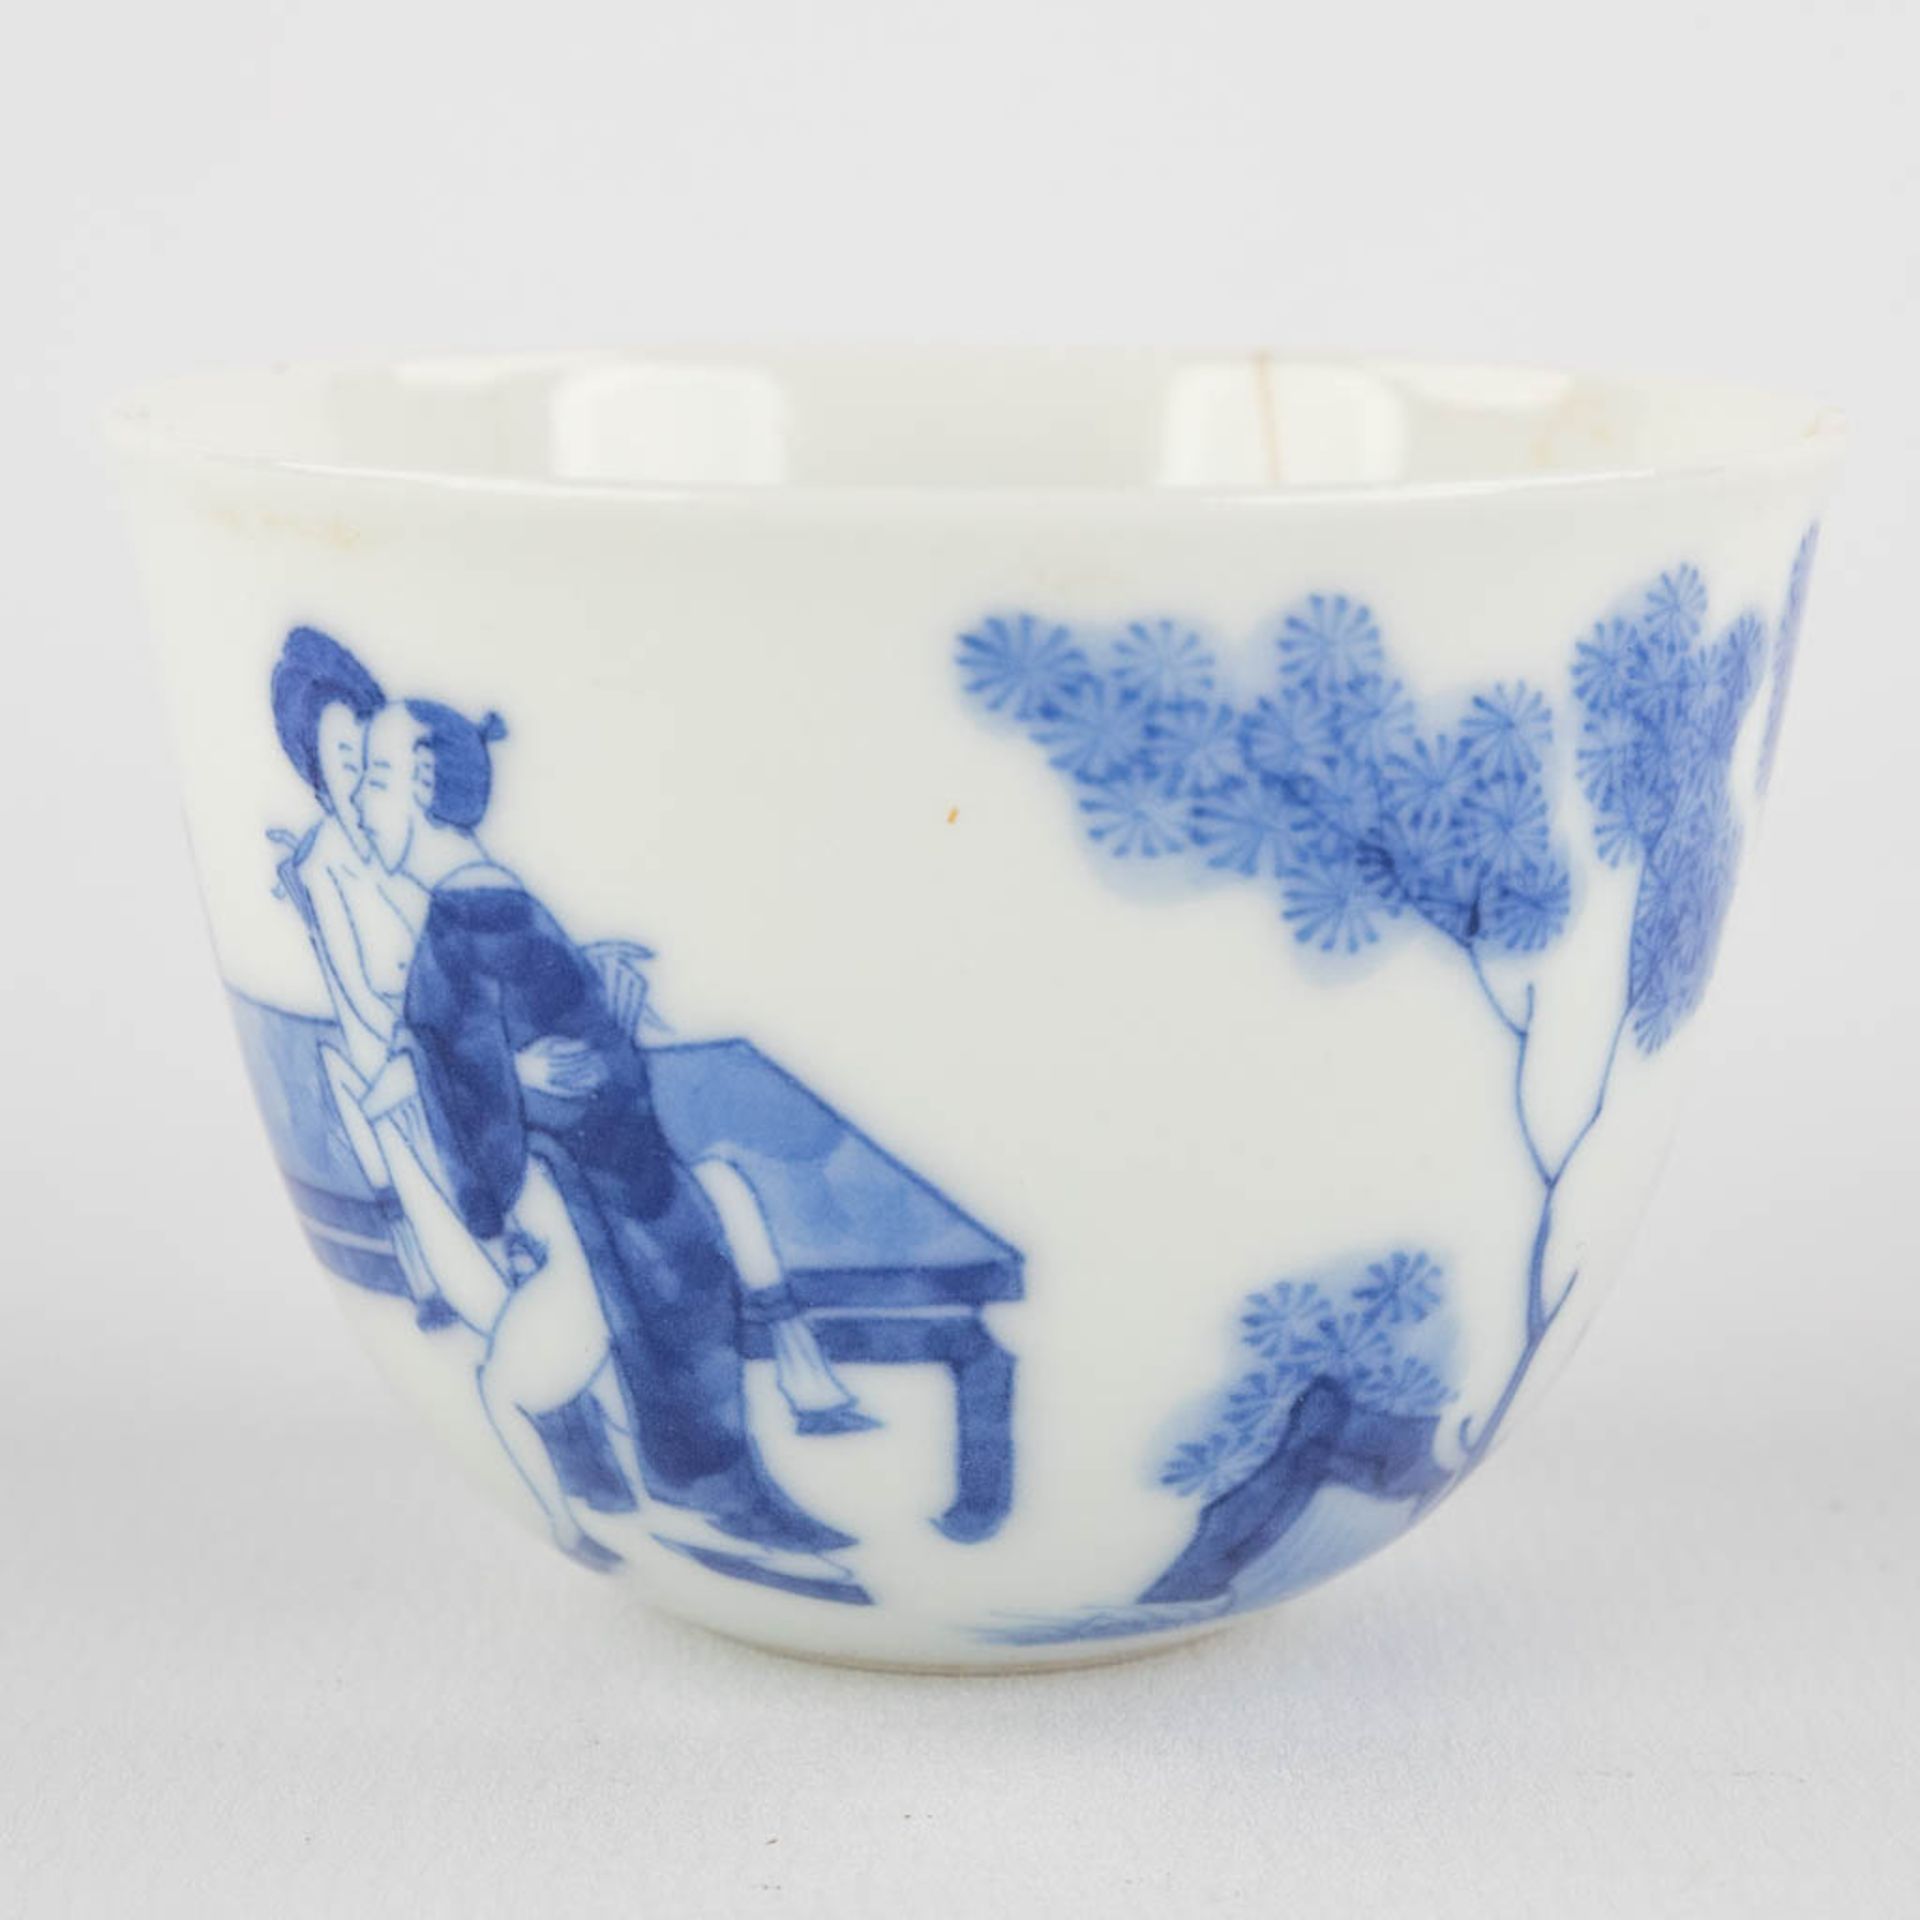 A small Chinese teacup with blue-white erotic scène, Chenghua mark, 19th/20th C. (H:4,5 x D:6,2 cm) - Image 7 of 11